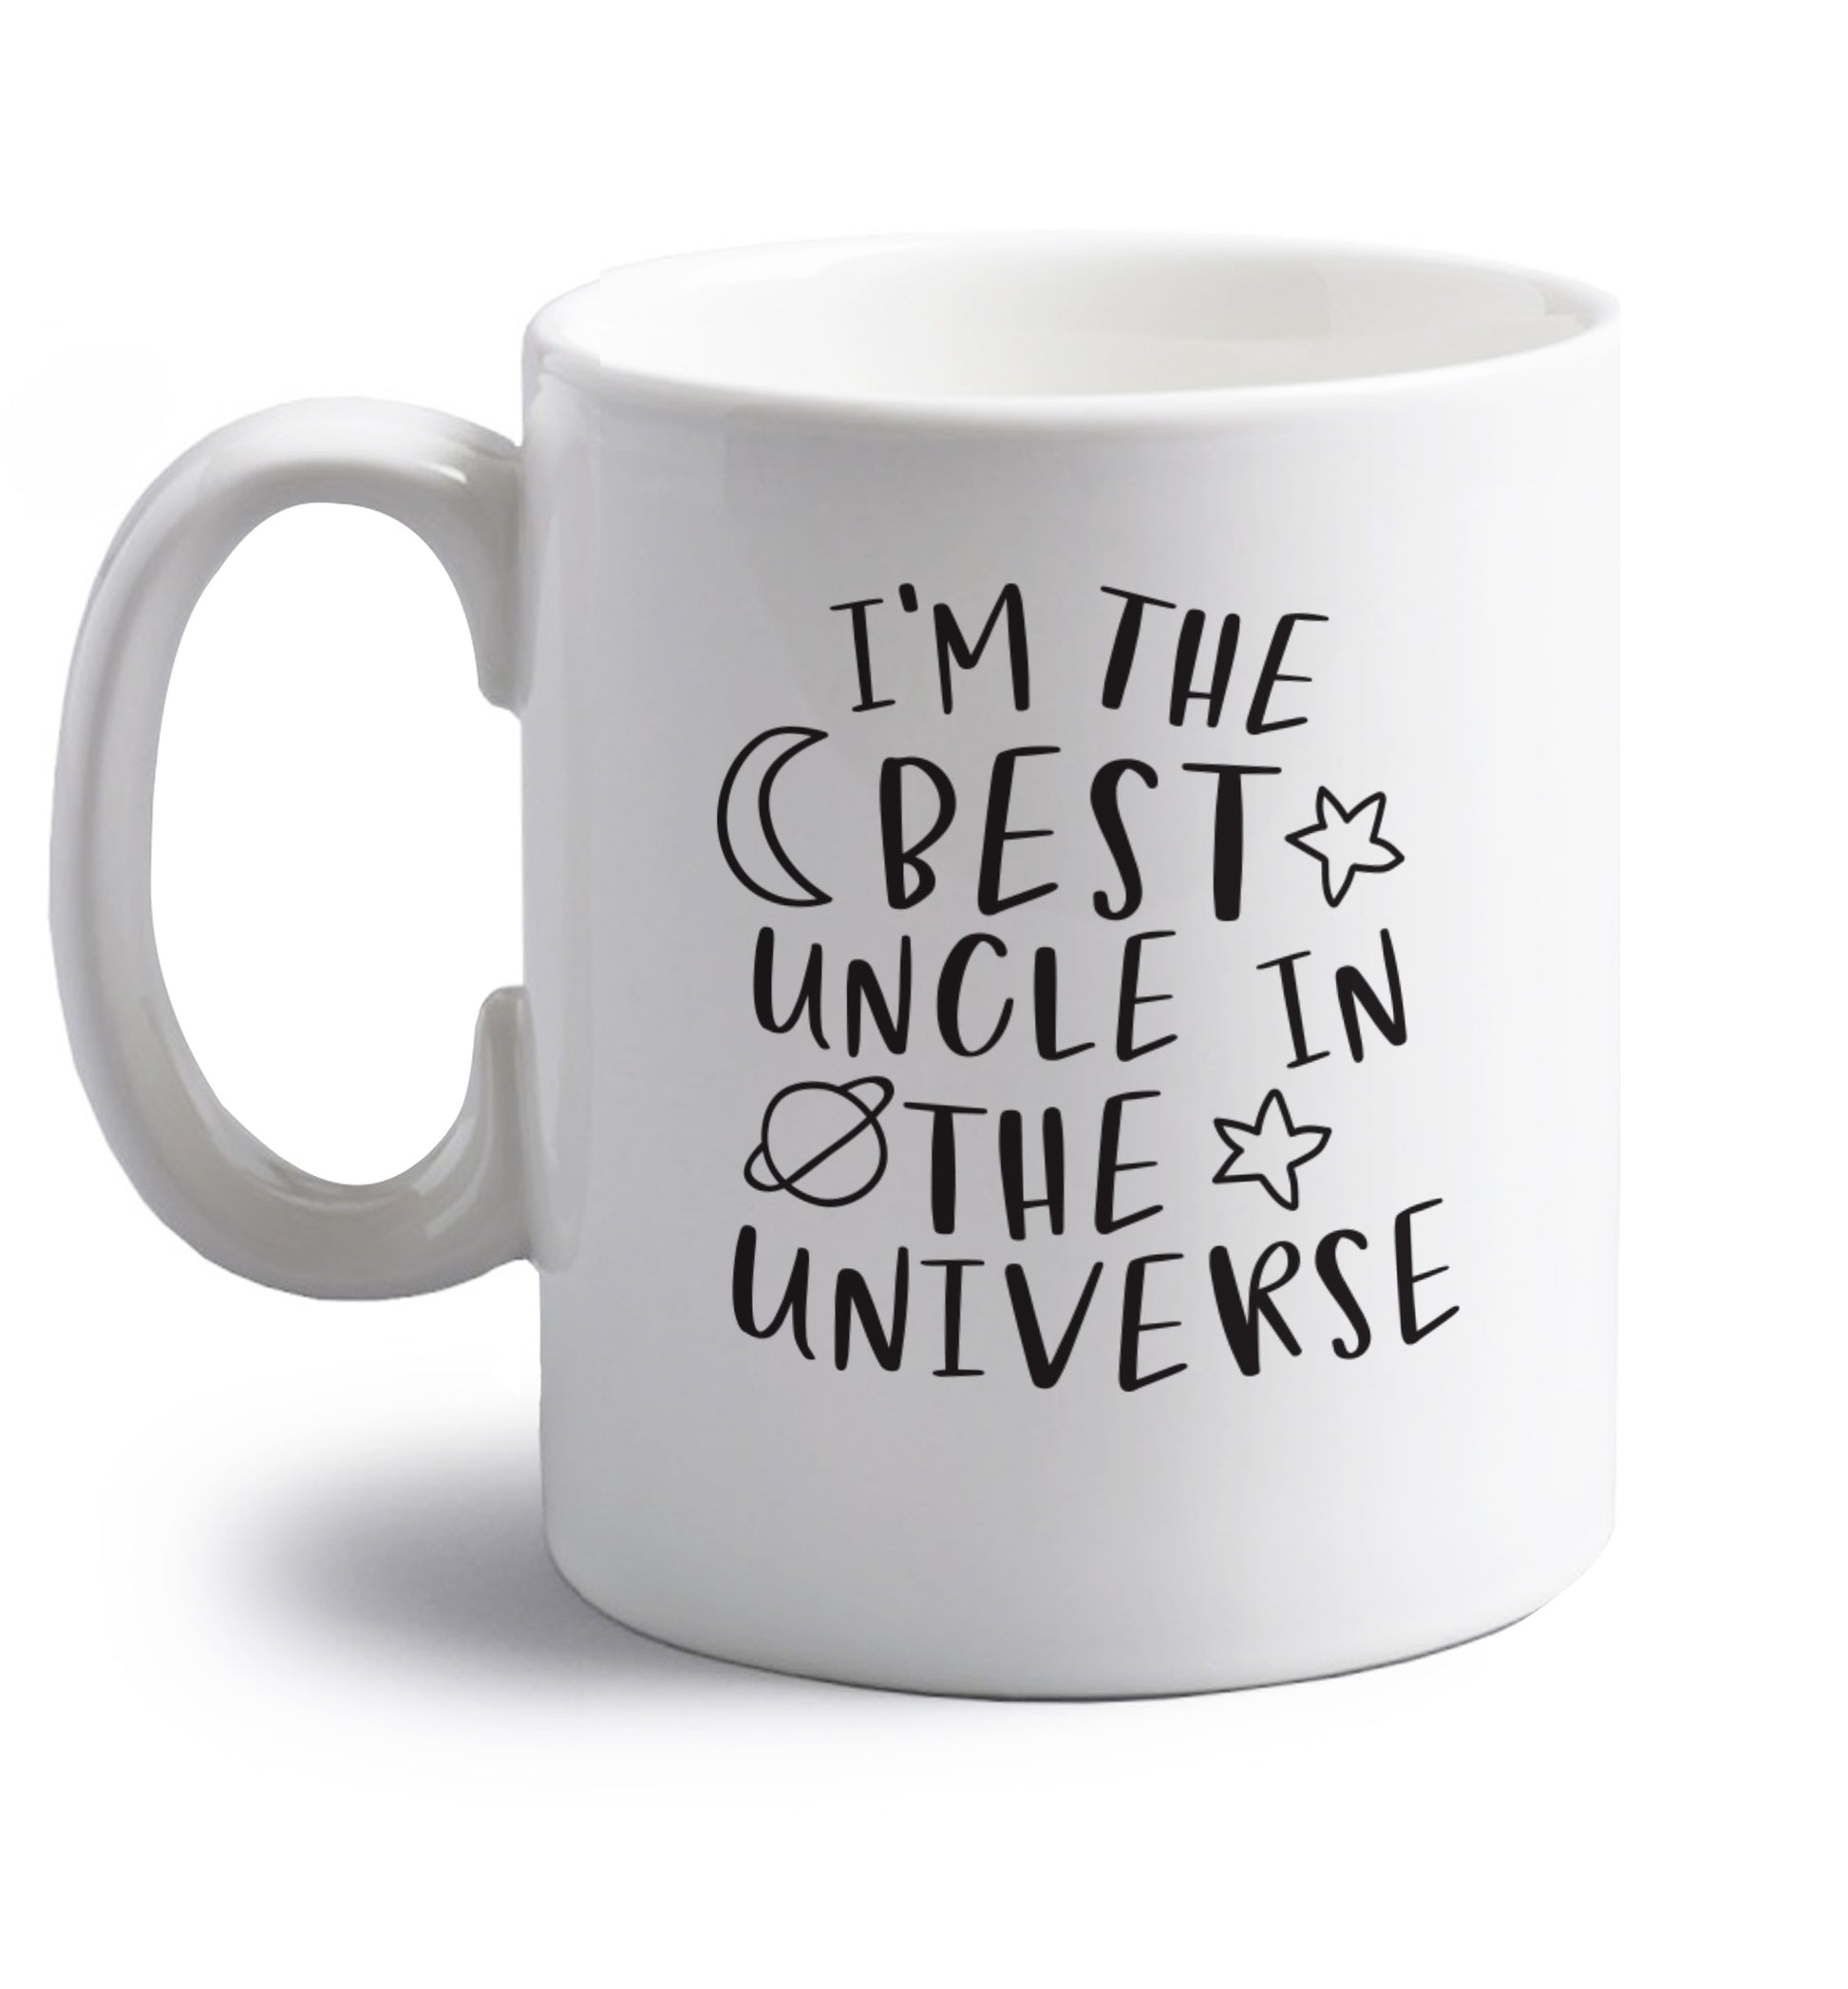 I'm the best uncle in the universe right handed white ceramic mug 